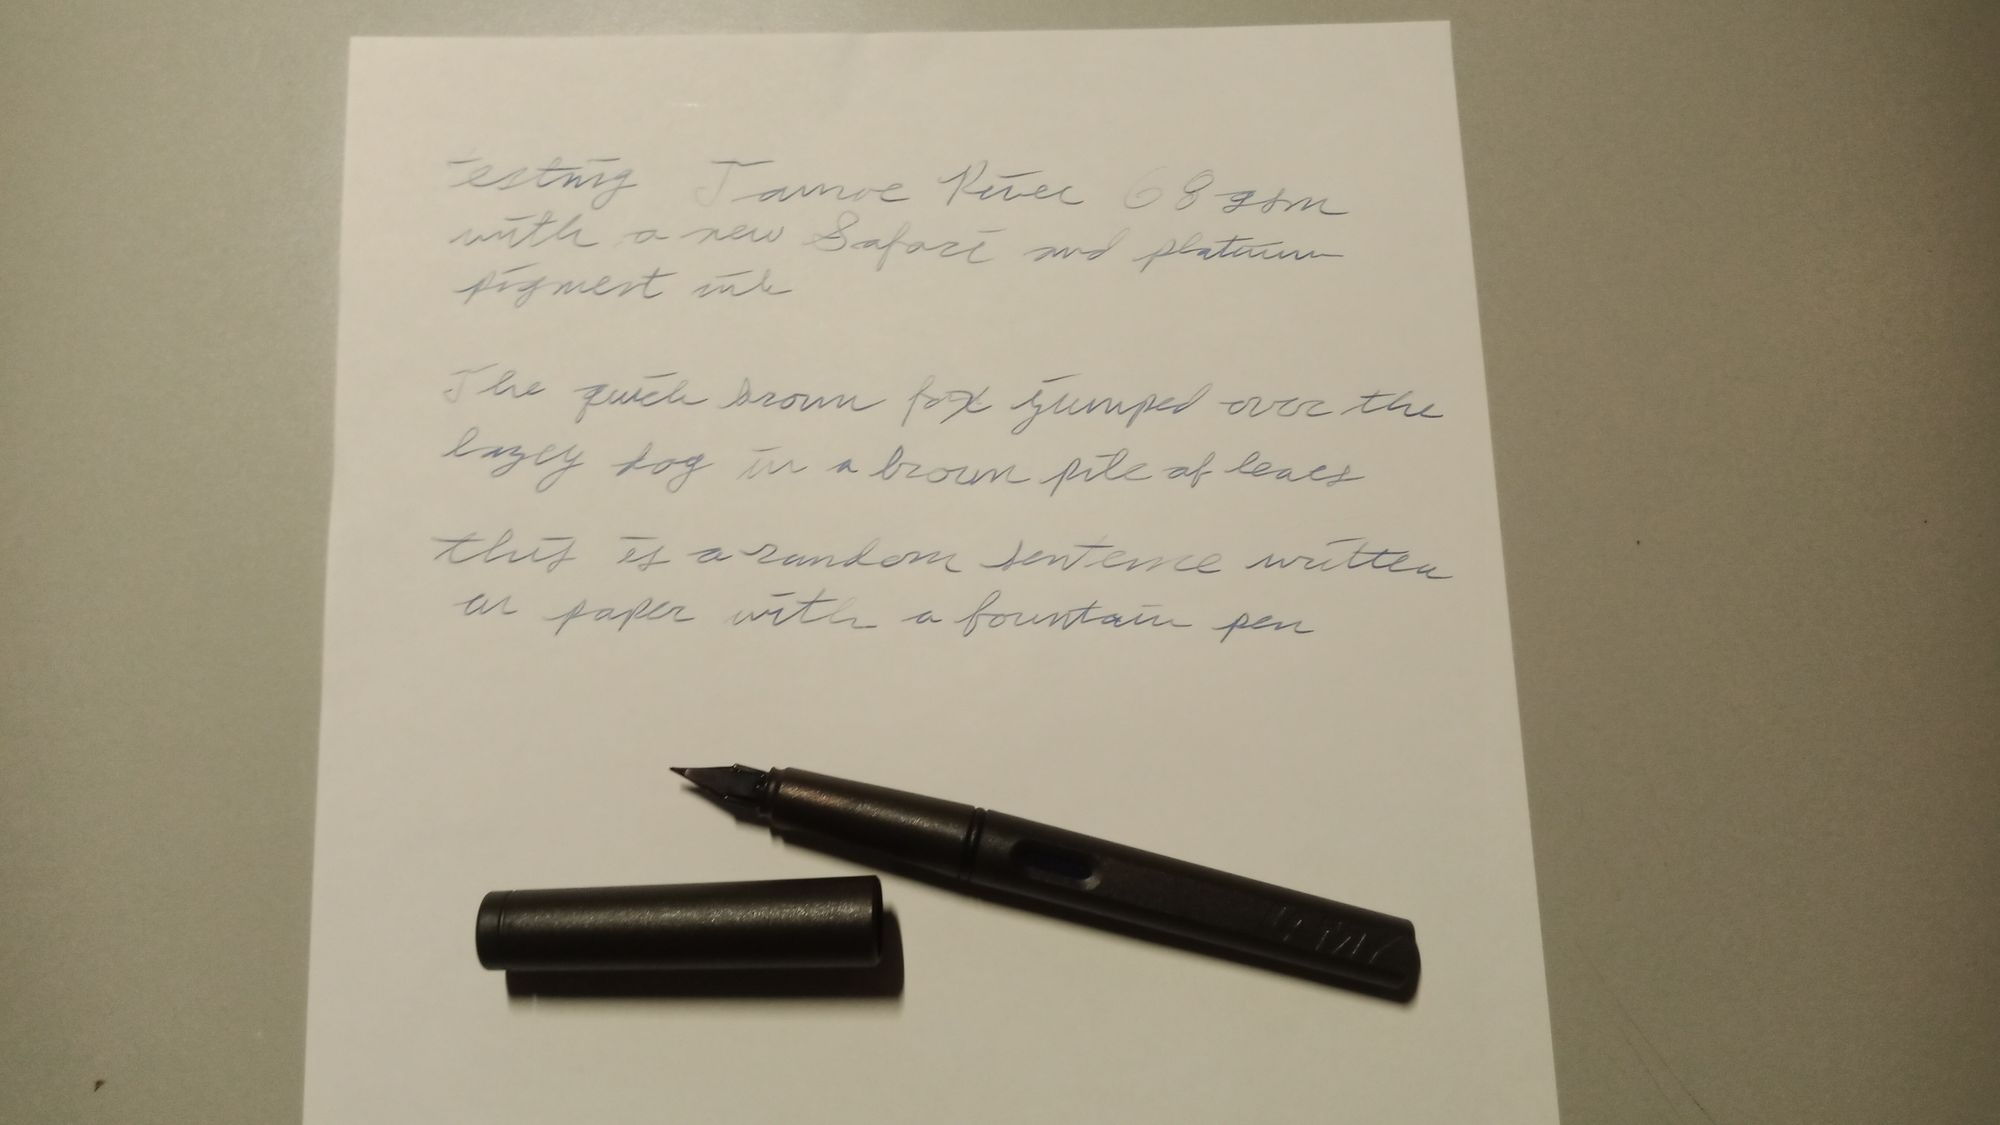 A sheet of Tamoe River paper with test writing on it and an uncapped fountain pen resting just below the writing